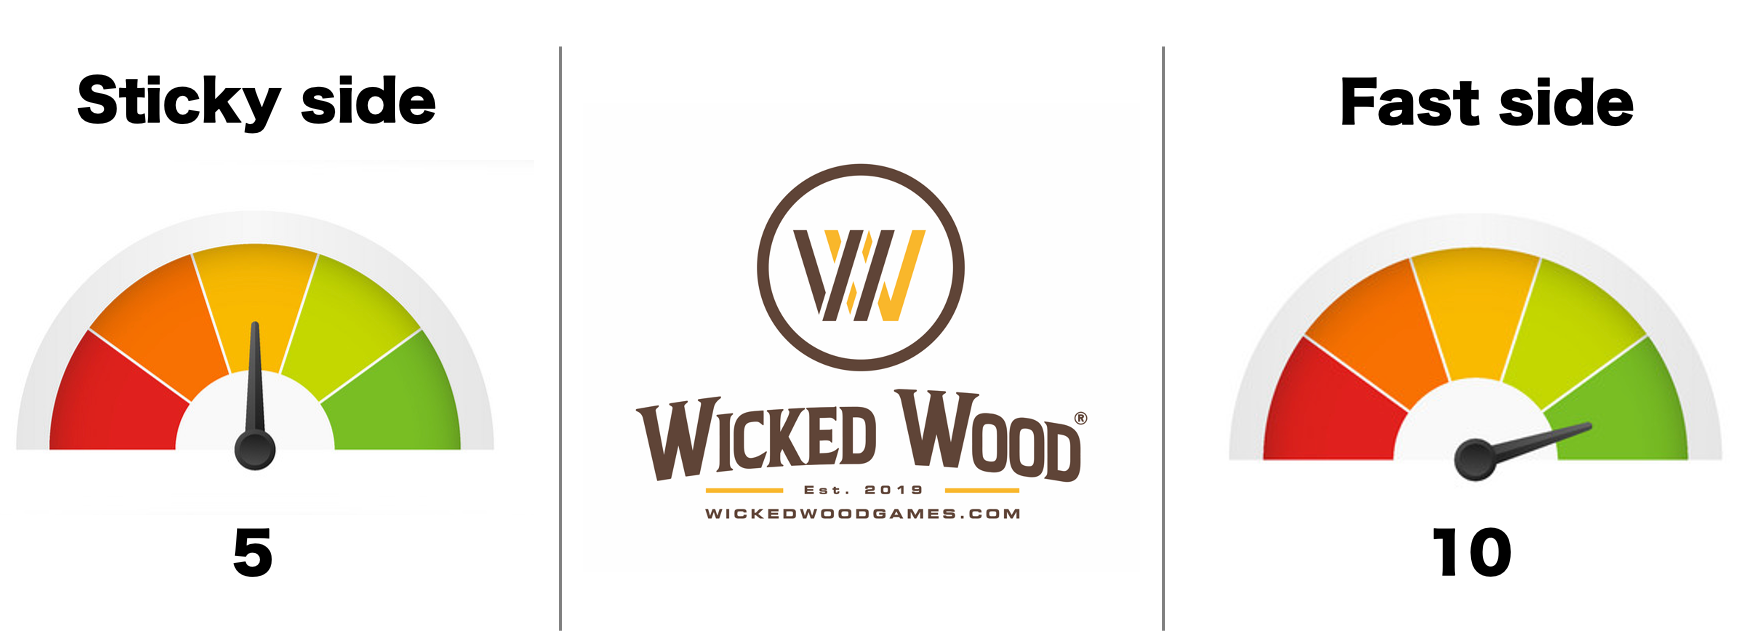 Wicked Wood Pro Bags - All-Slide 2.0 - 1x4 Cornhole Bags - Wicked Wood Games